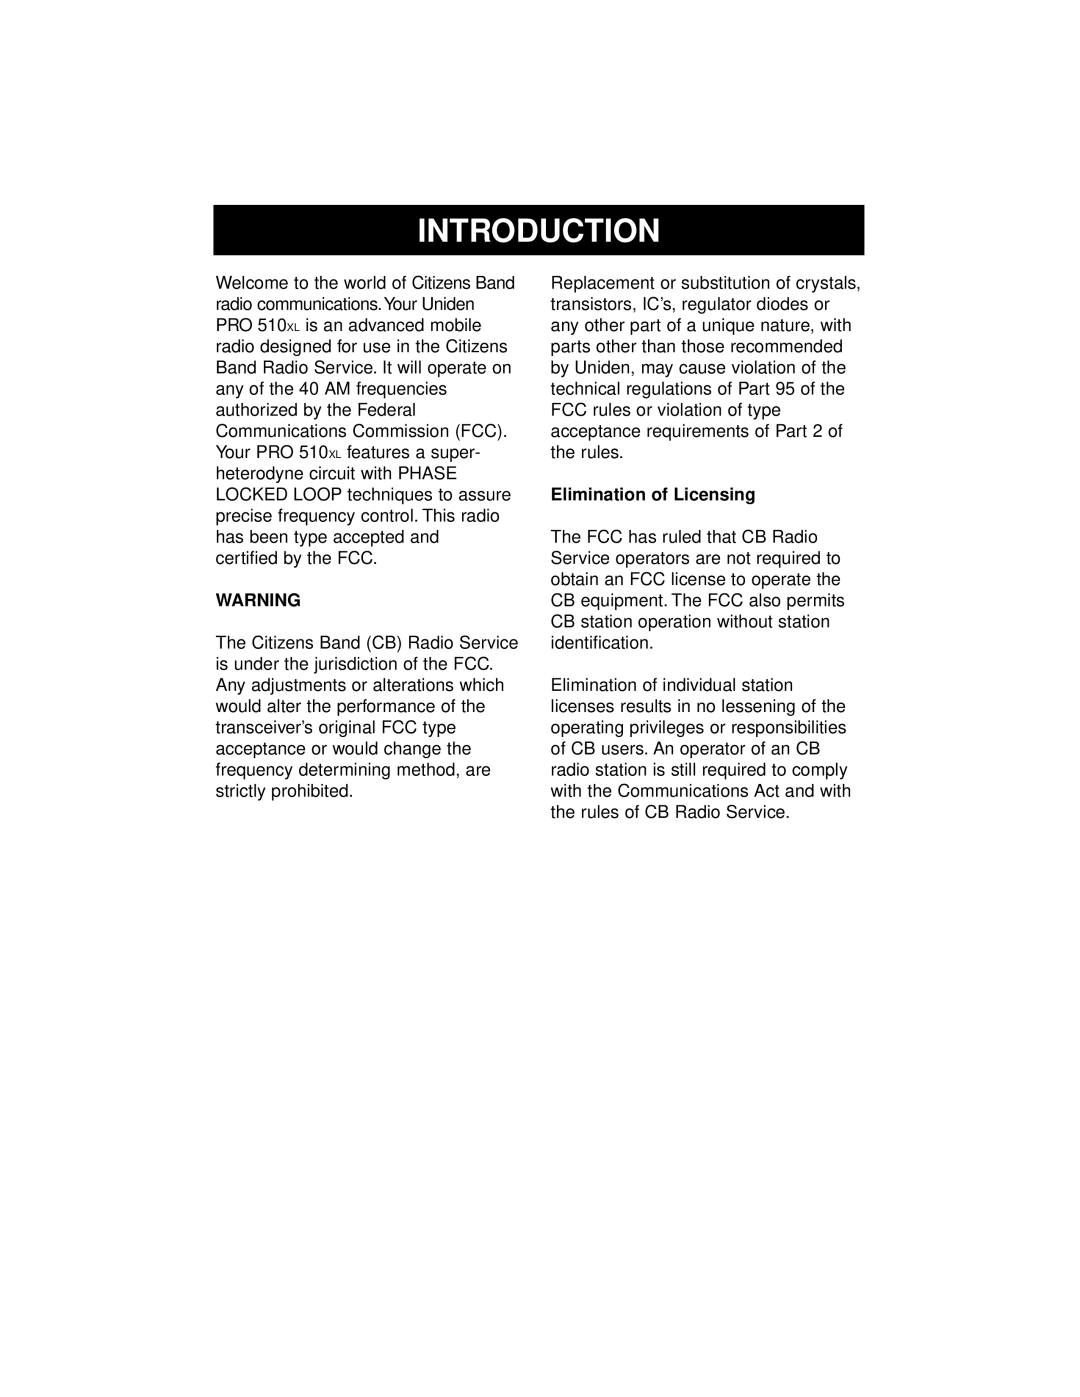 Uniden PRO 510XL manual Introduction, Elimination of Licensing 